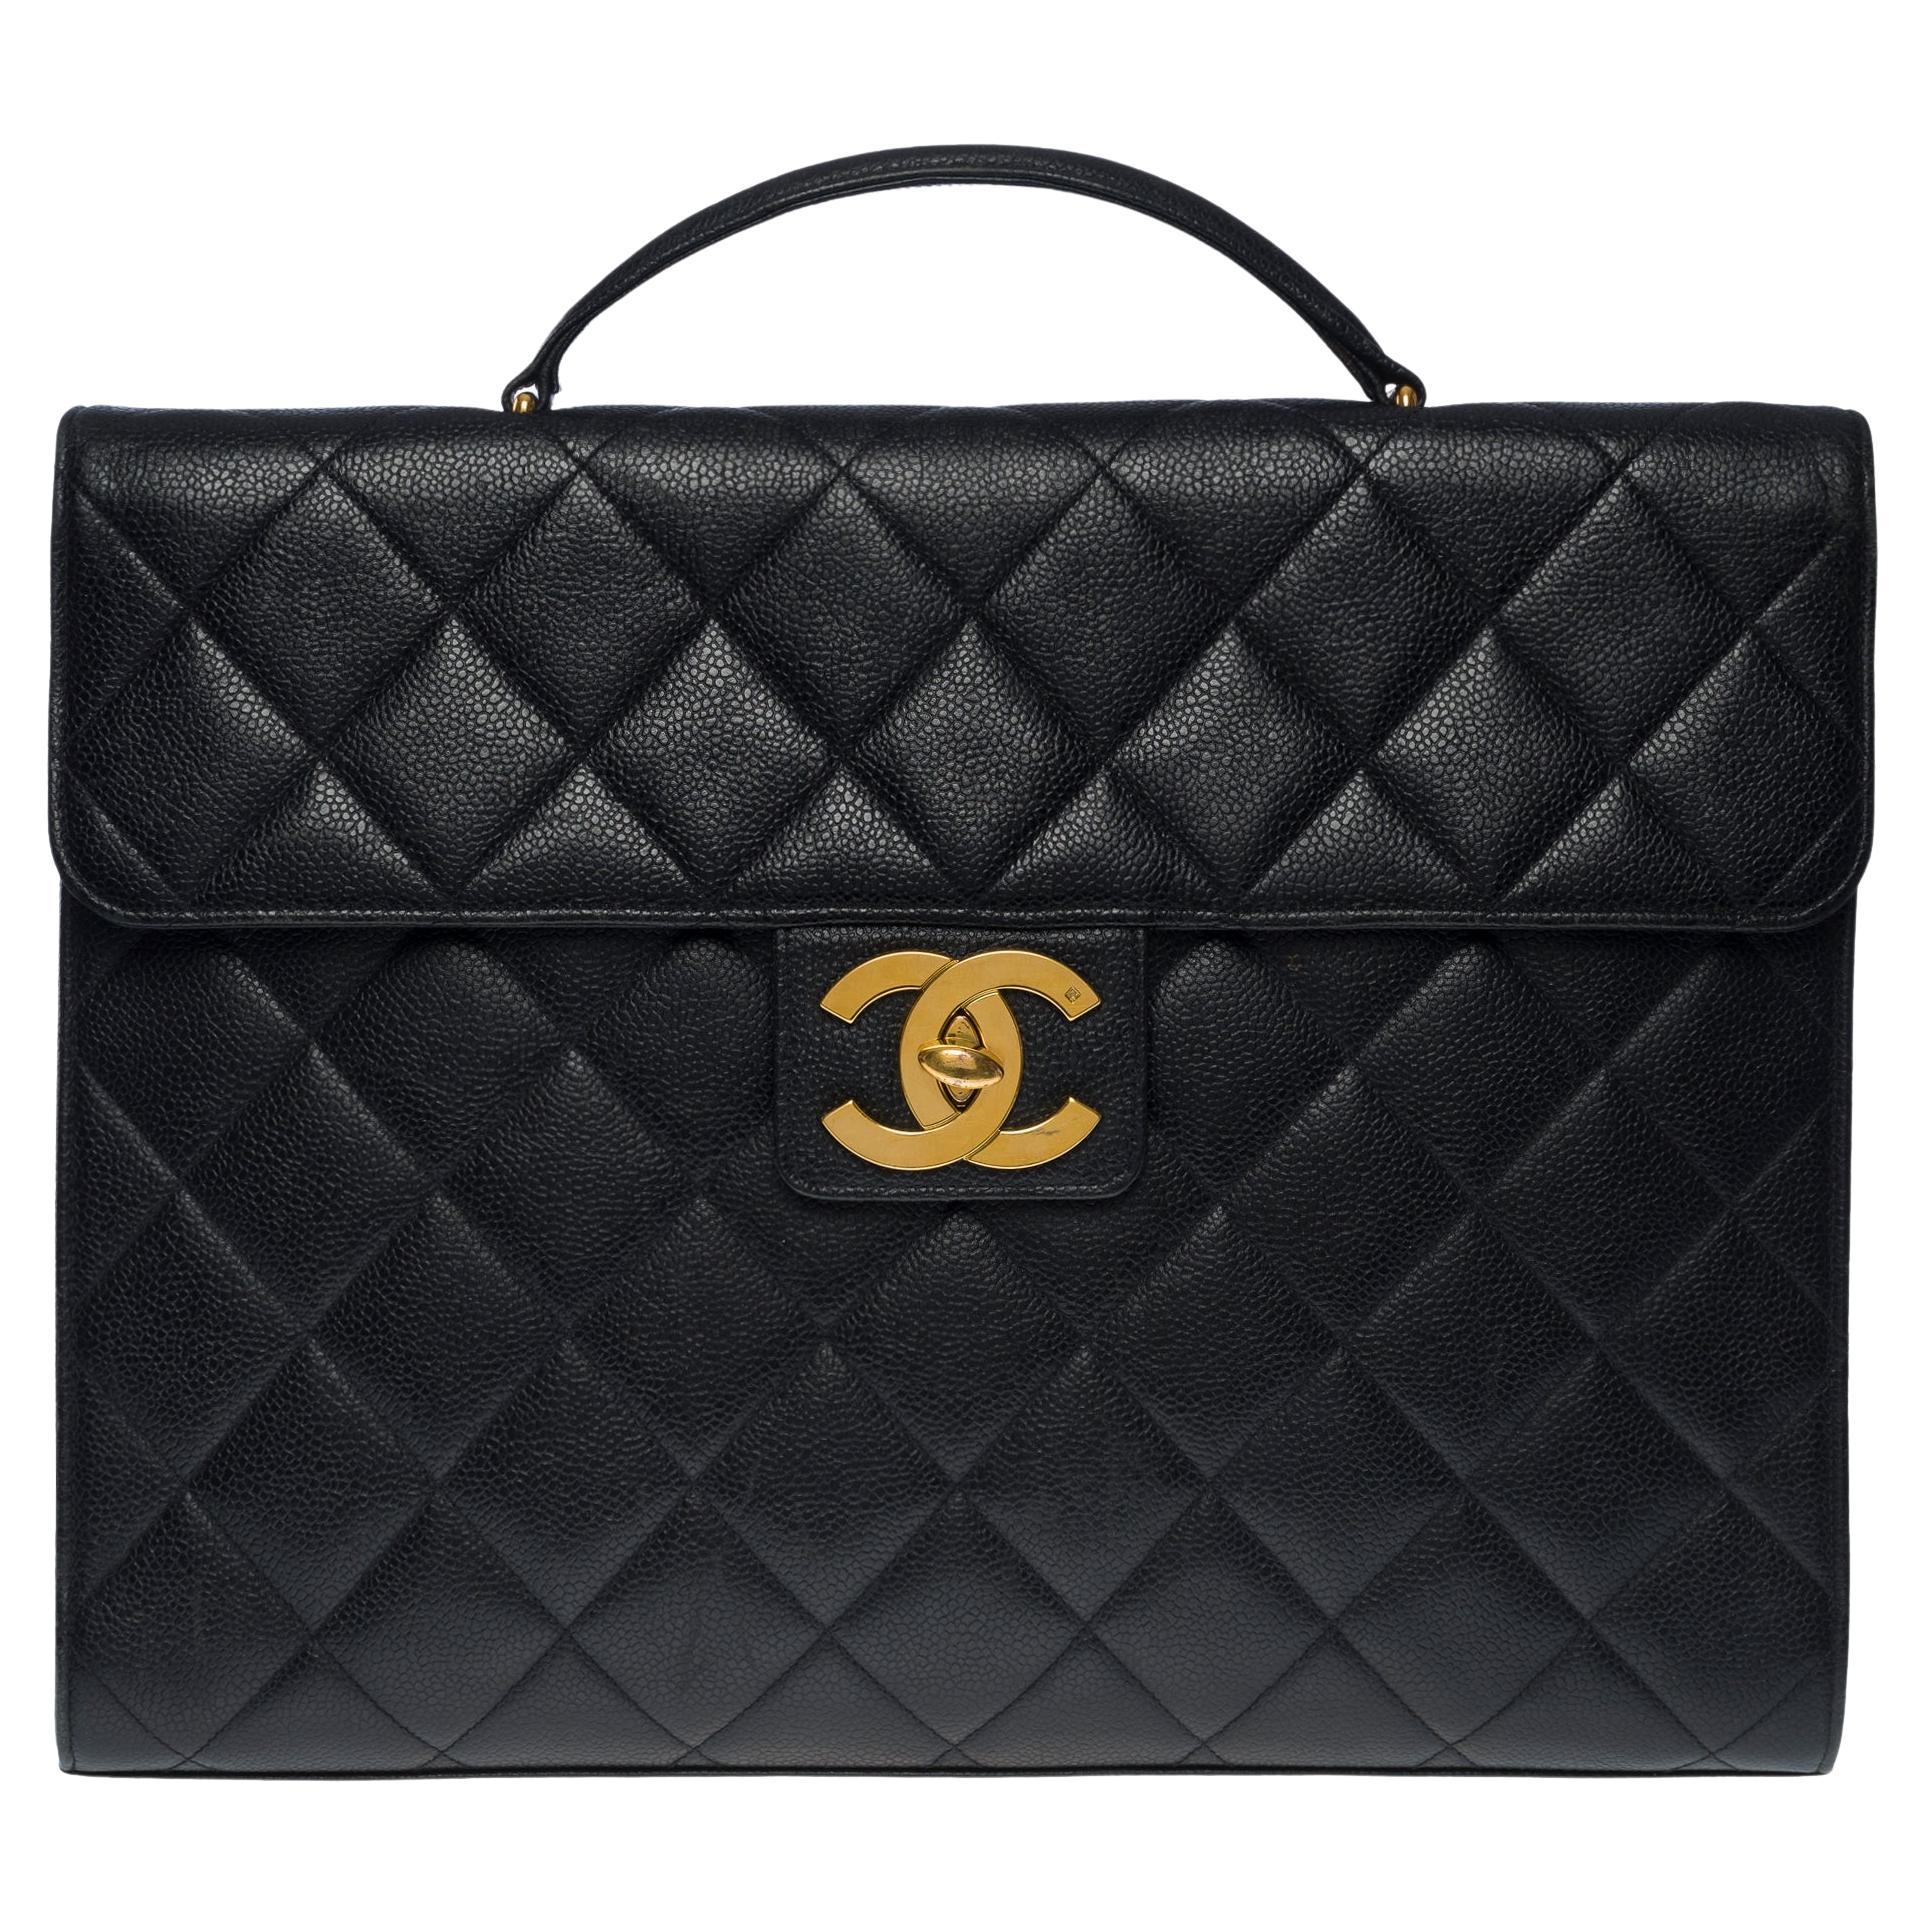 Amazing Chanel vintage Briefcase in black caviar leather, GHW